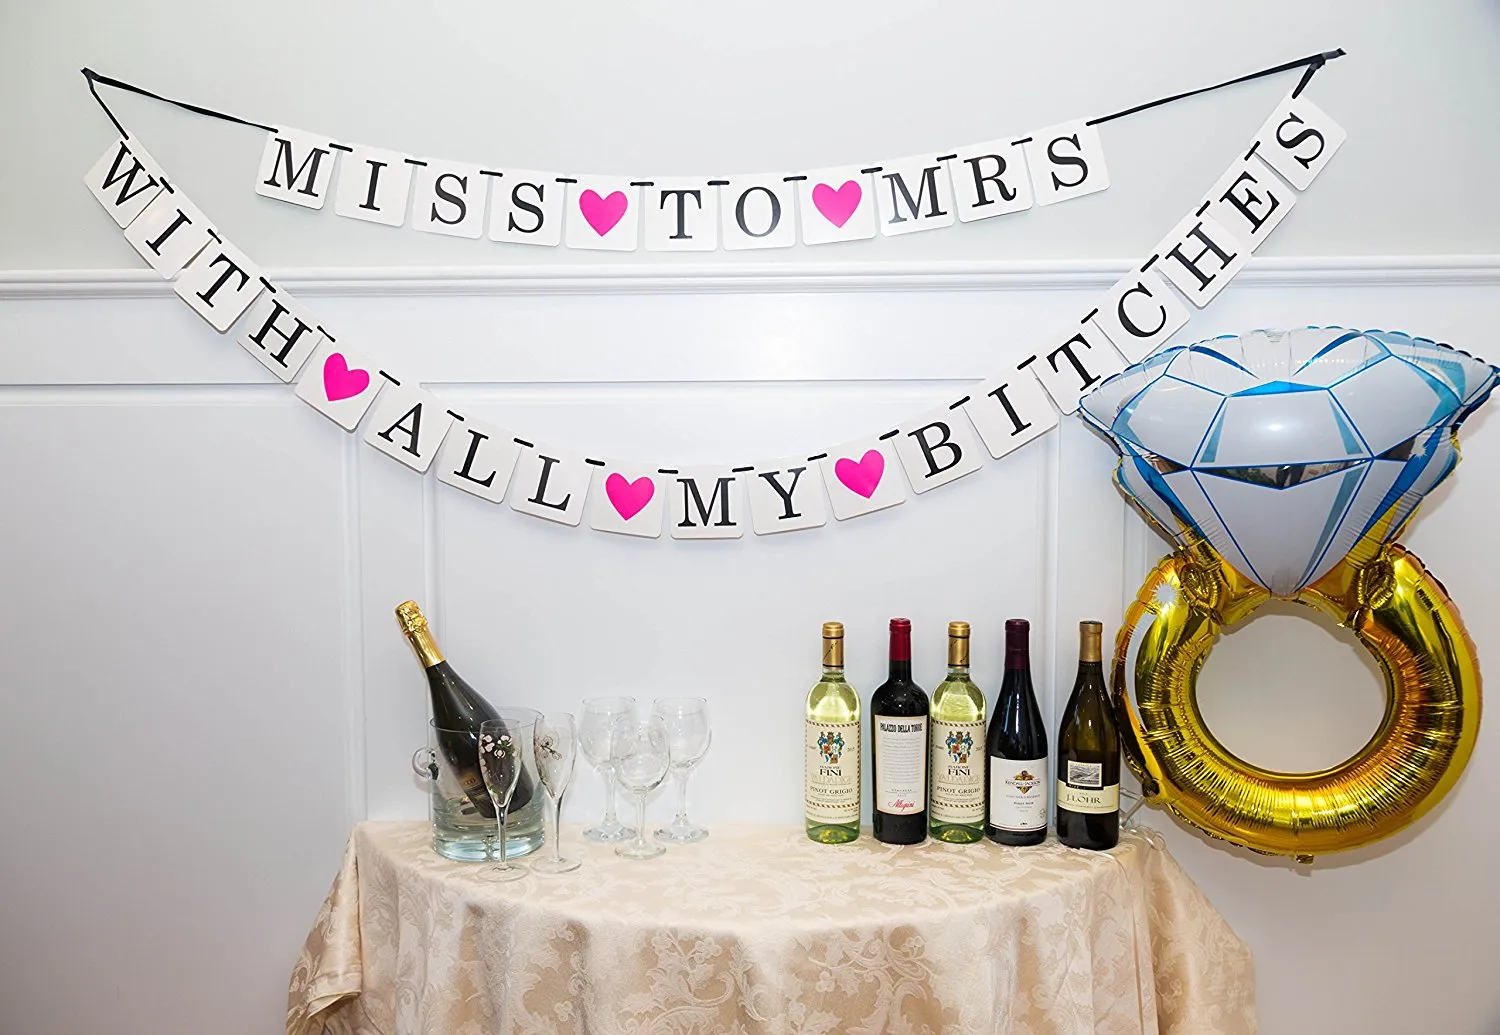 MISS TO MRS,WITH ALL MY BITCHES HEN Party and Wedding Party Bunting Banner Paper Garland Photo Booth Prop Photobooth